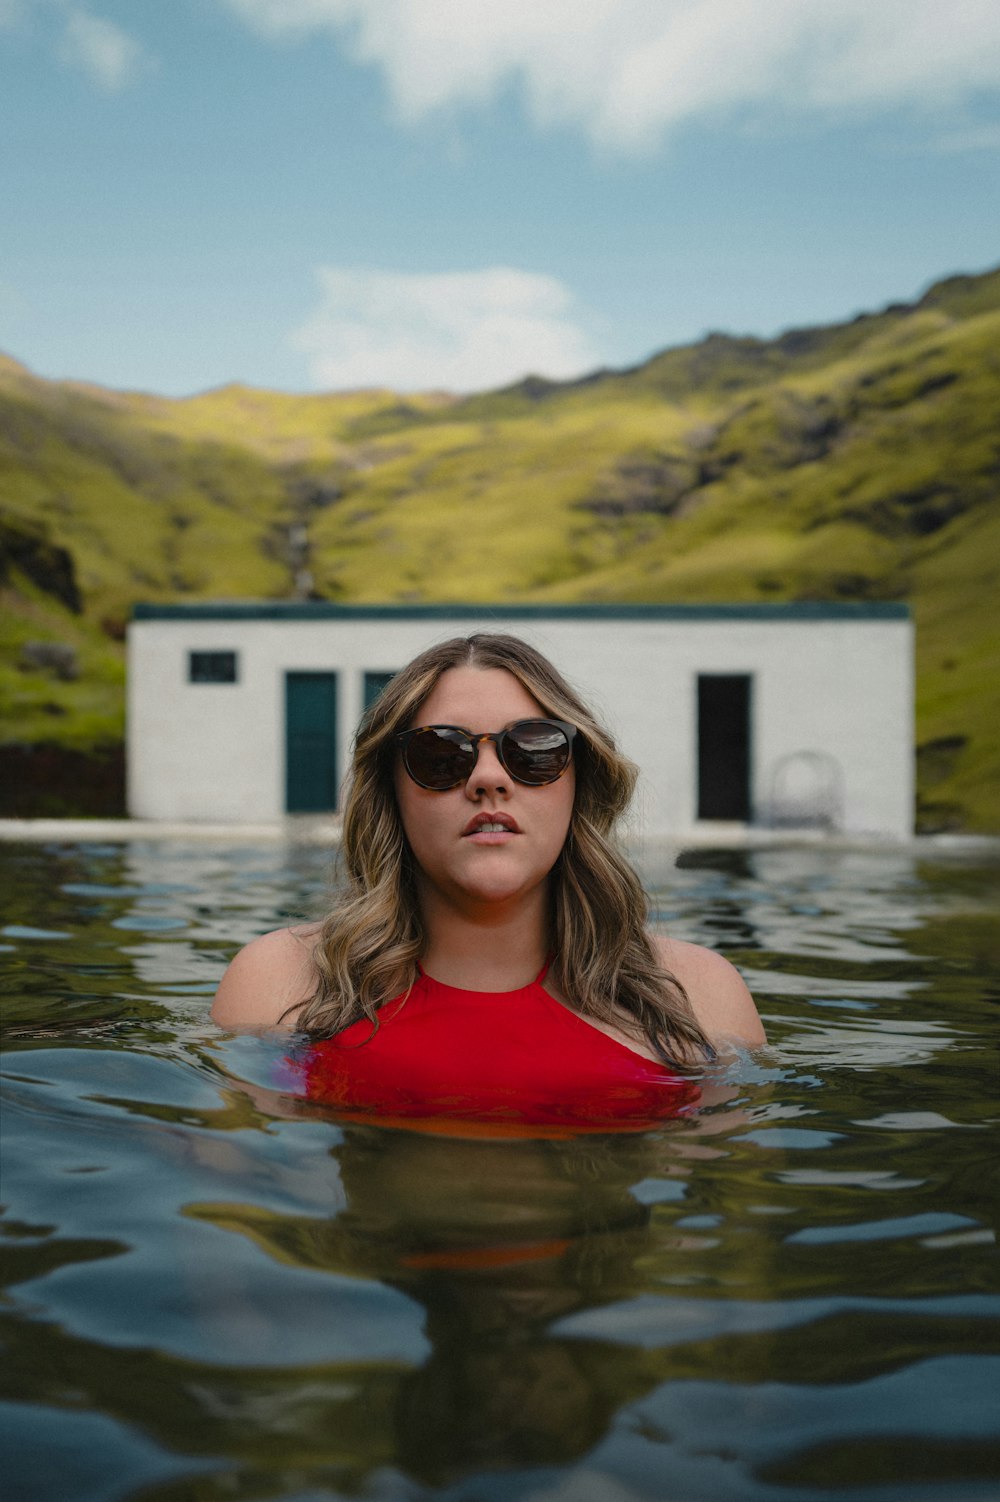 a woman in a red top in a body of water